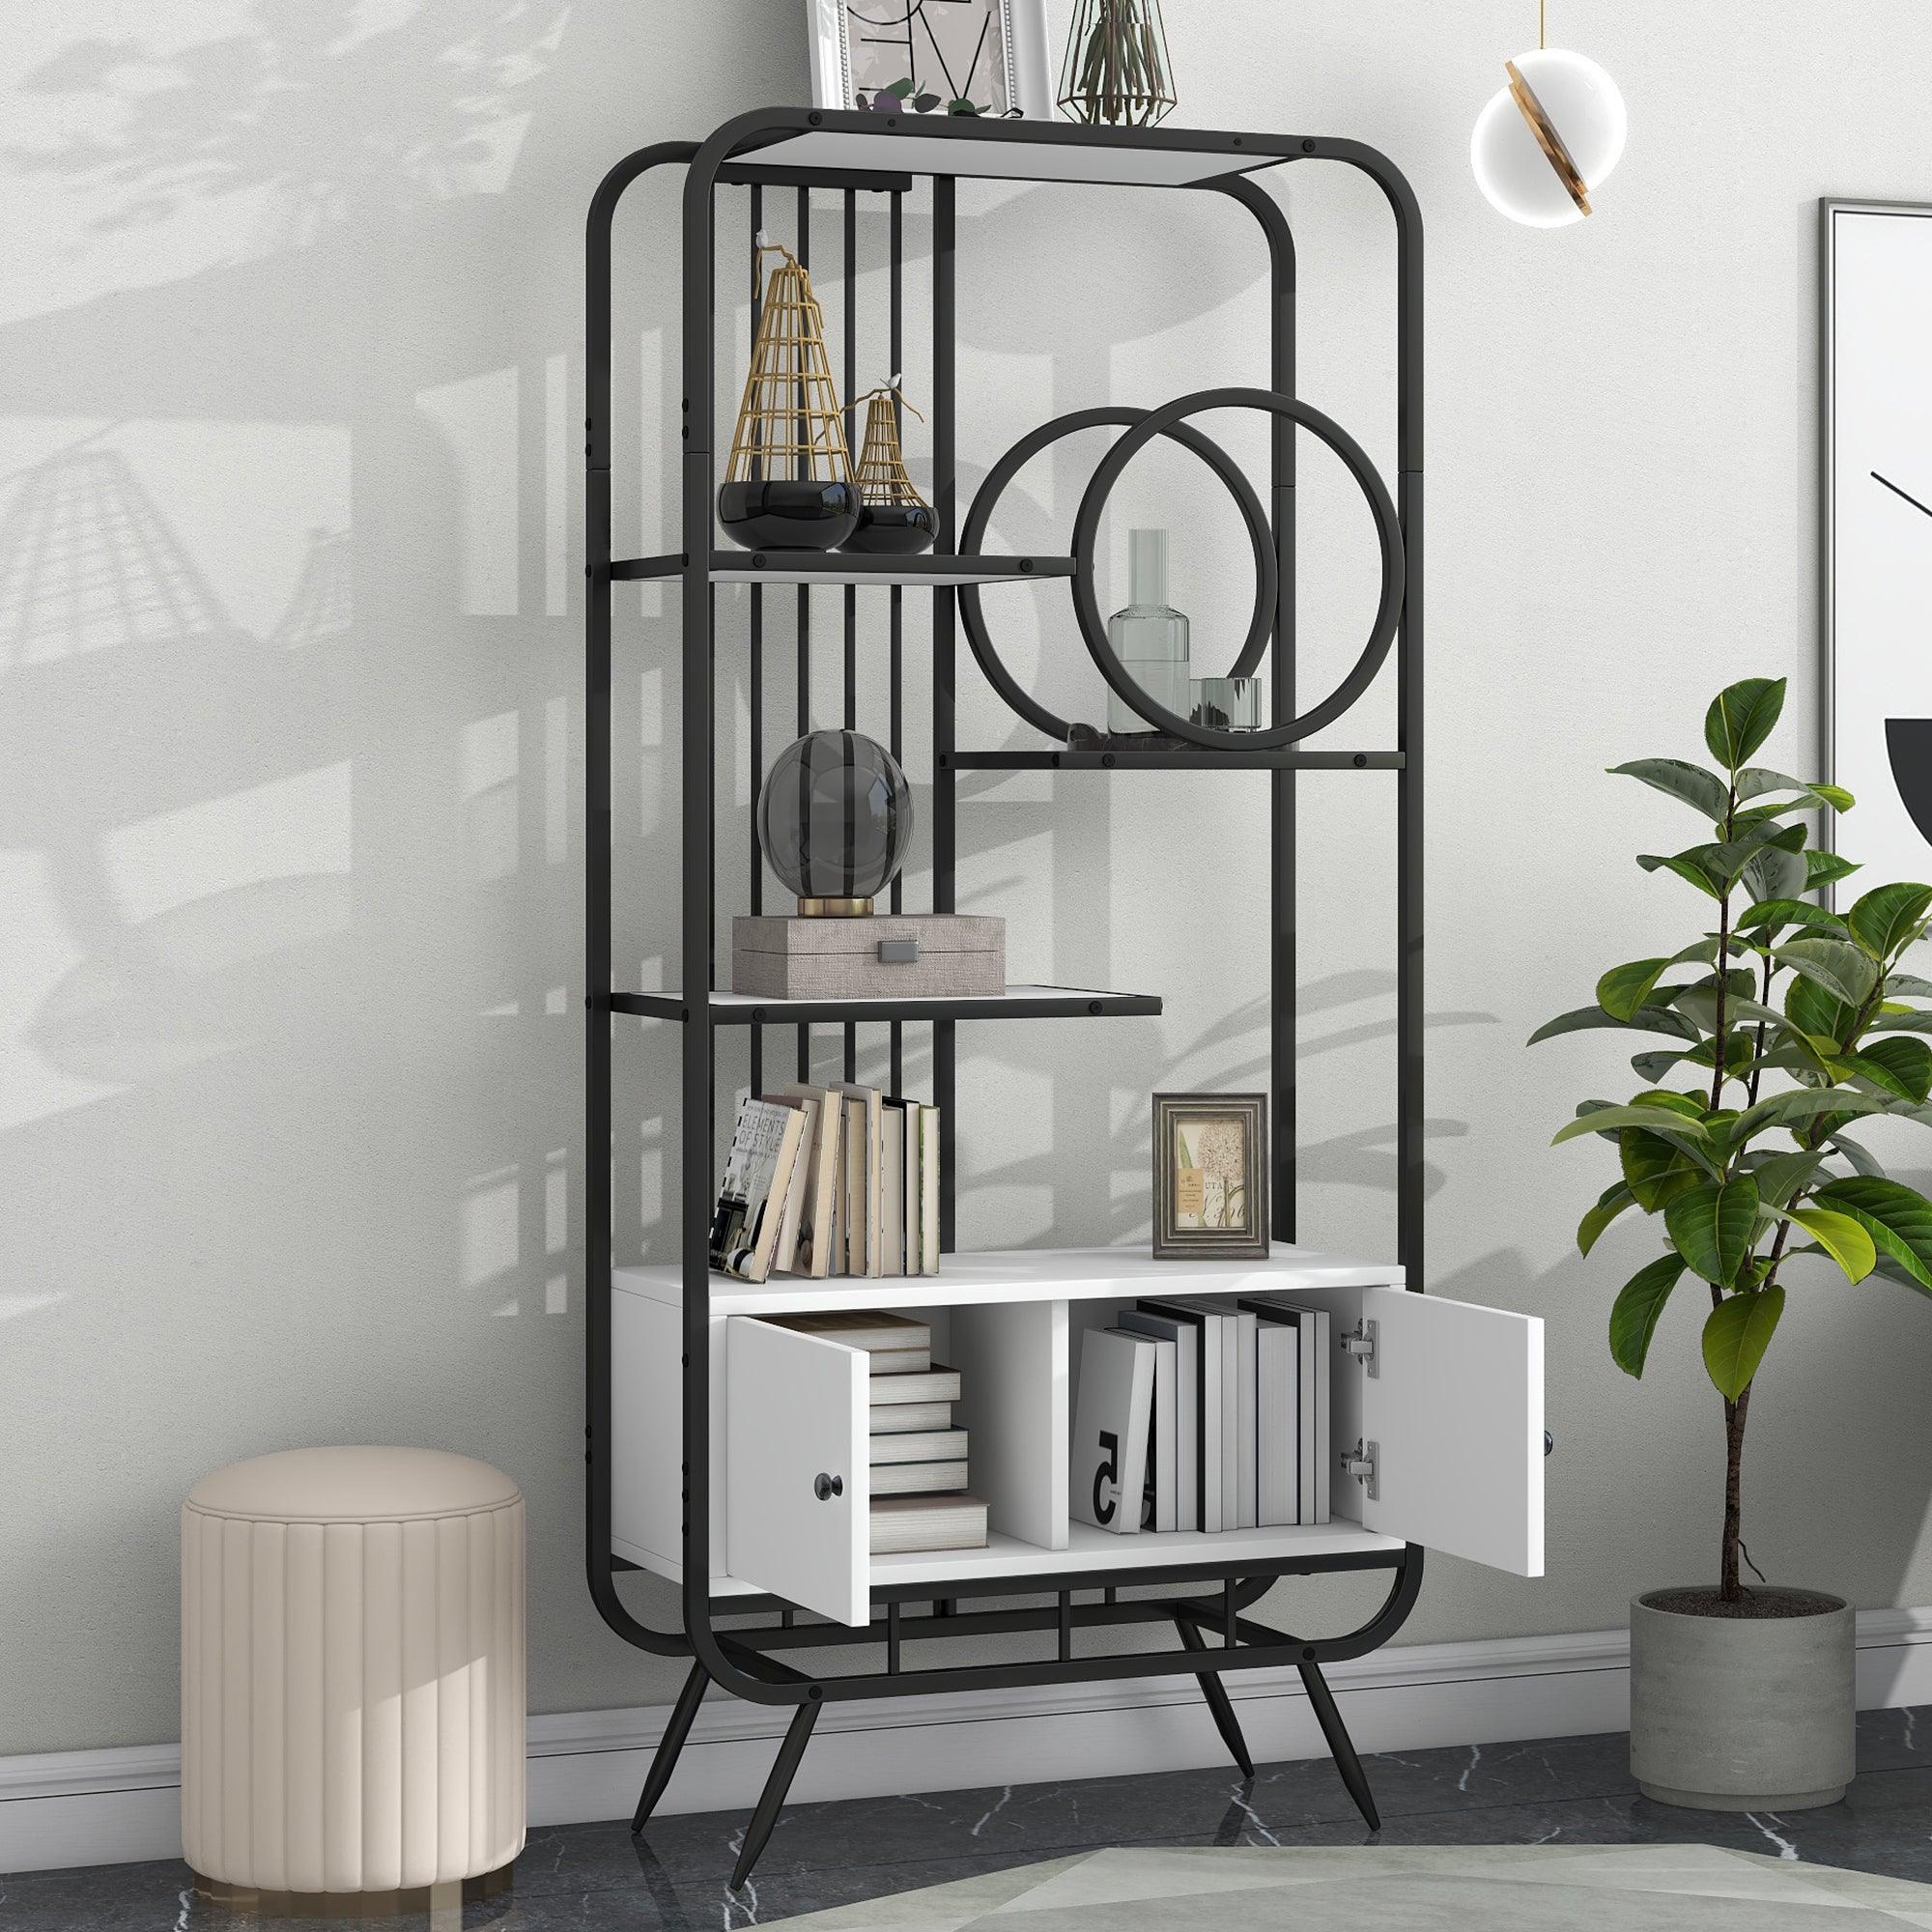 Home Office Bookcase With Cabinet Open Bookshelf Storage Large Bookshelf Furniture With Black Metal Frame, White